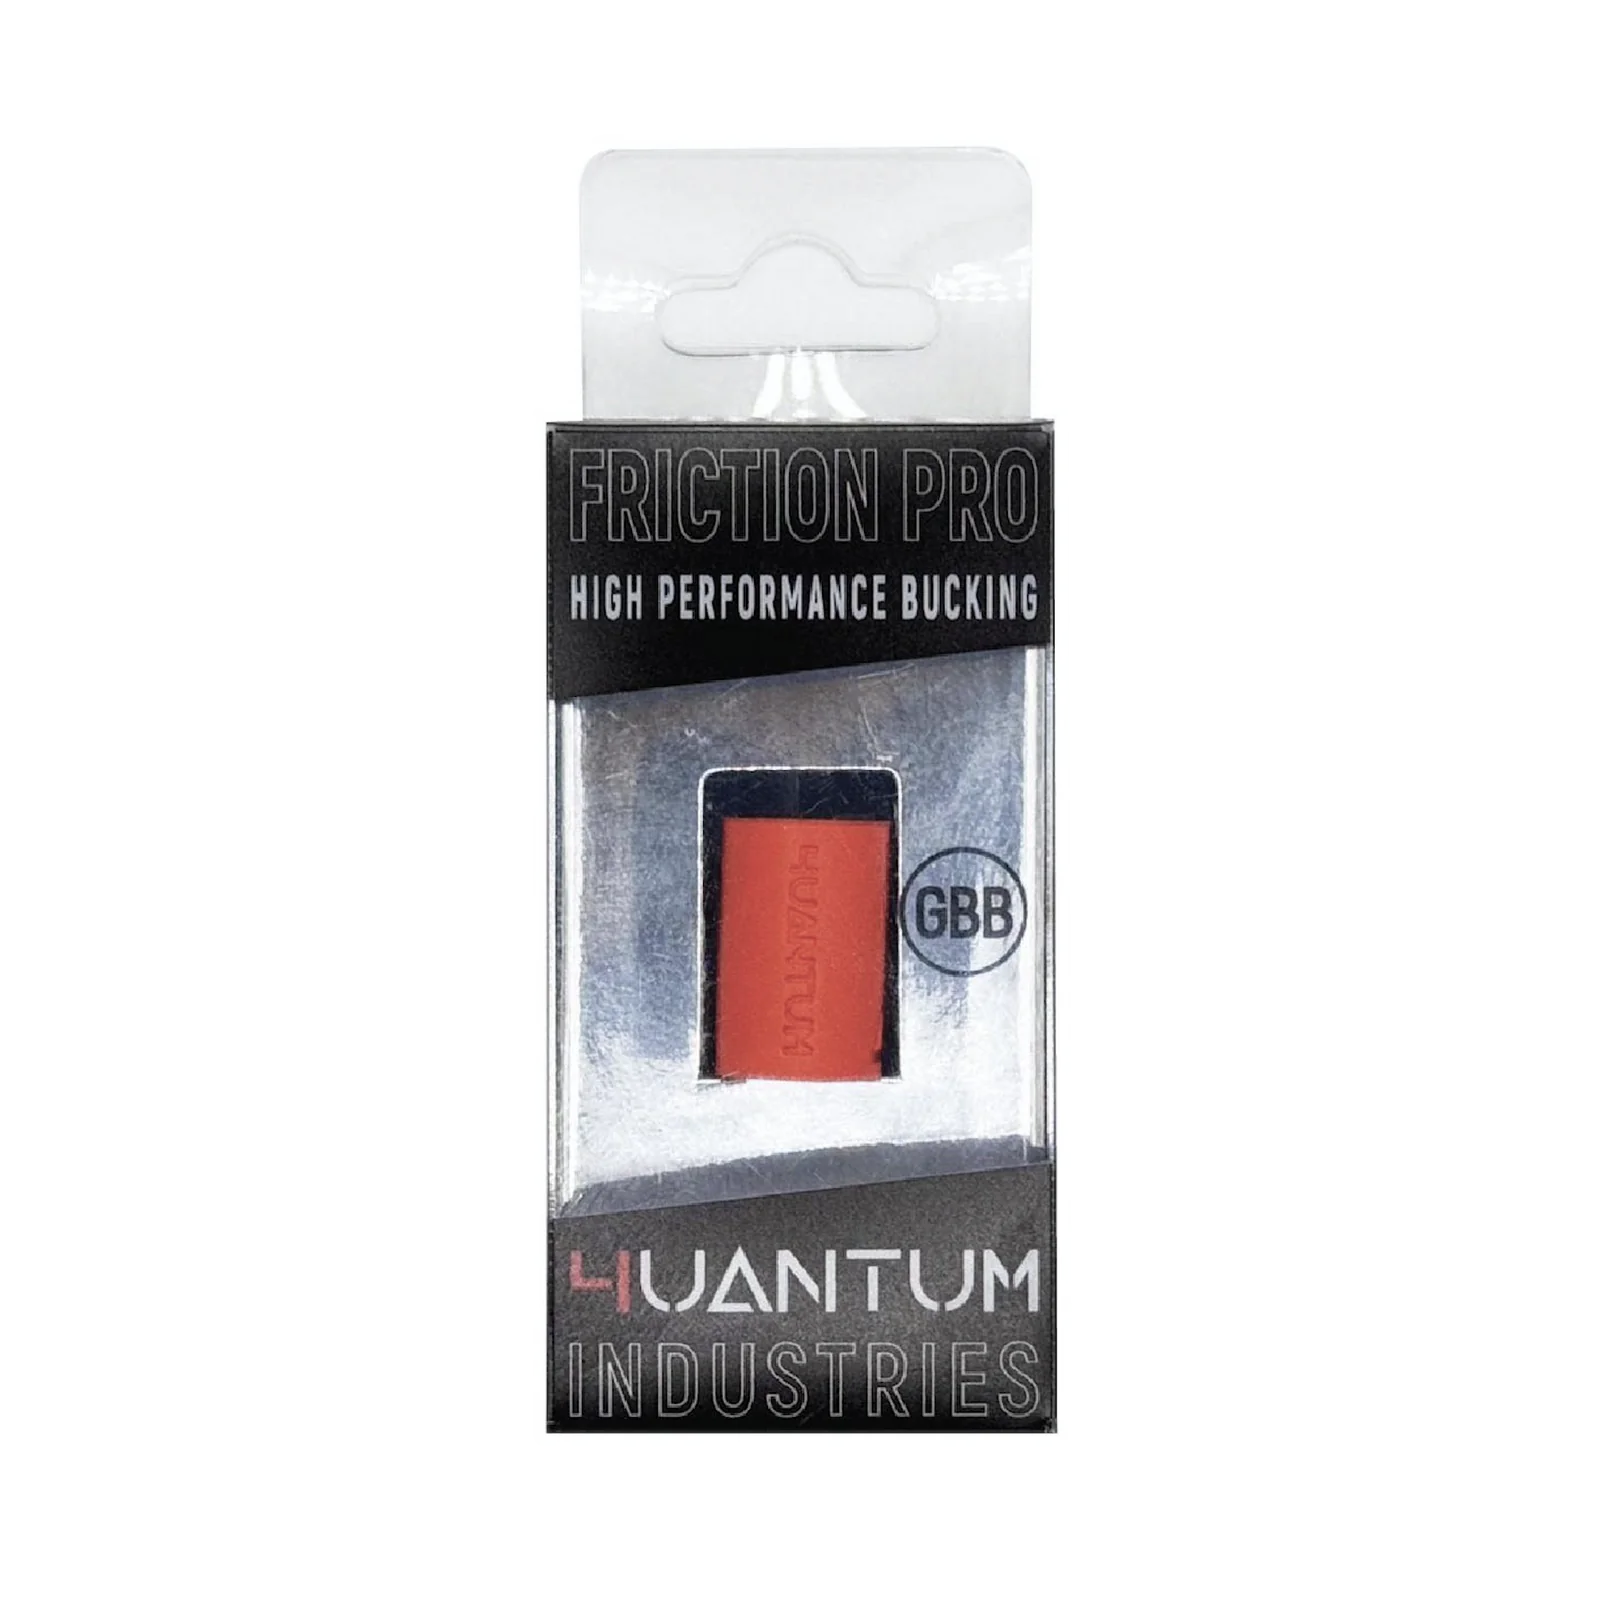 4uantum Precision Pro High Performance Hop Up Bucking – GBB | 4UAD Smart Airsoft